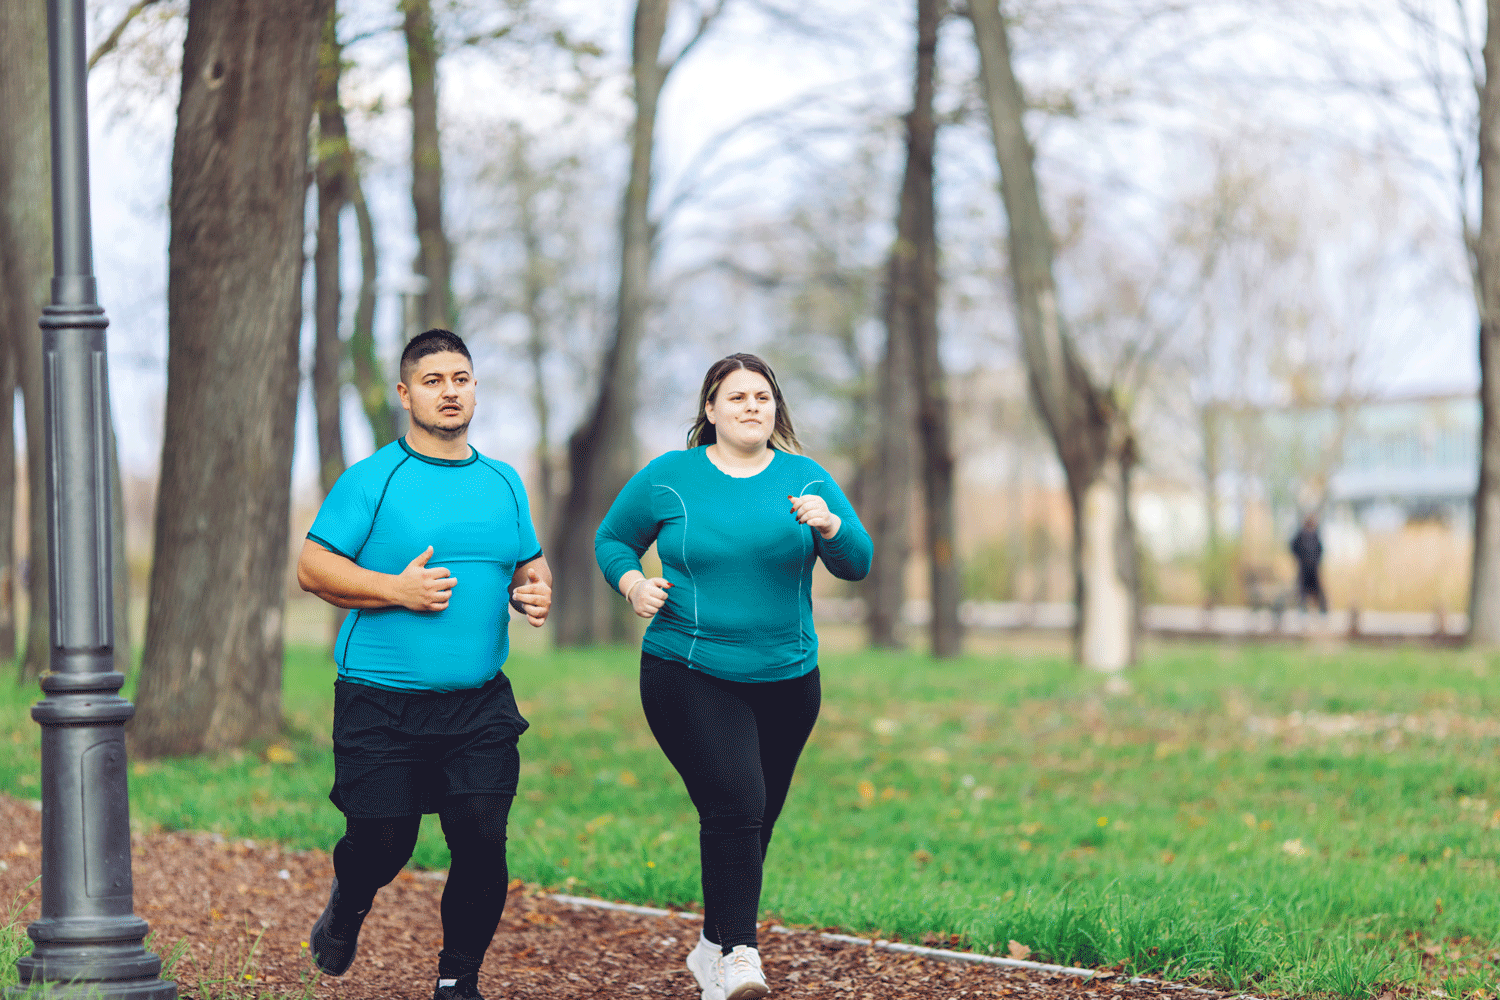 two overweight individuals, a man on the left and a woman on the right, running in a park.